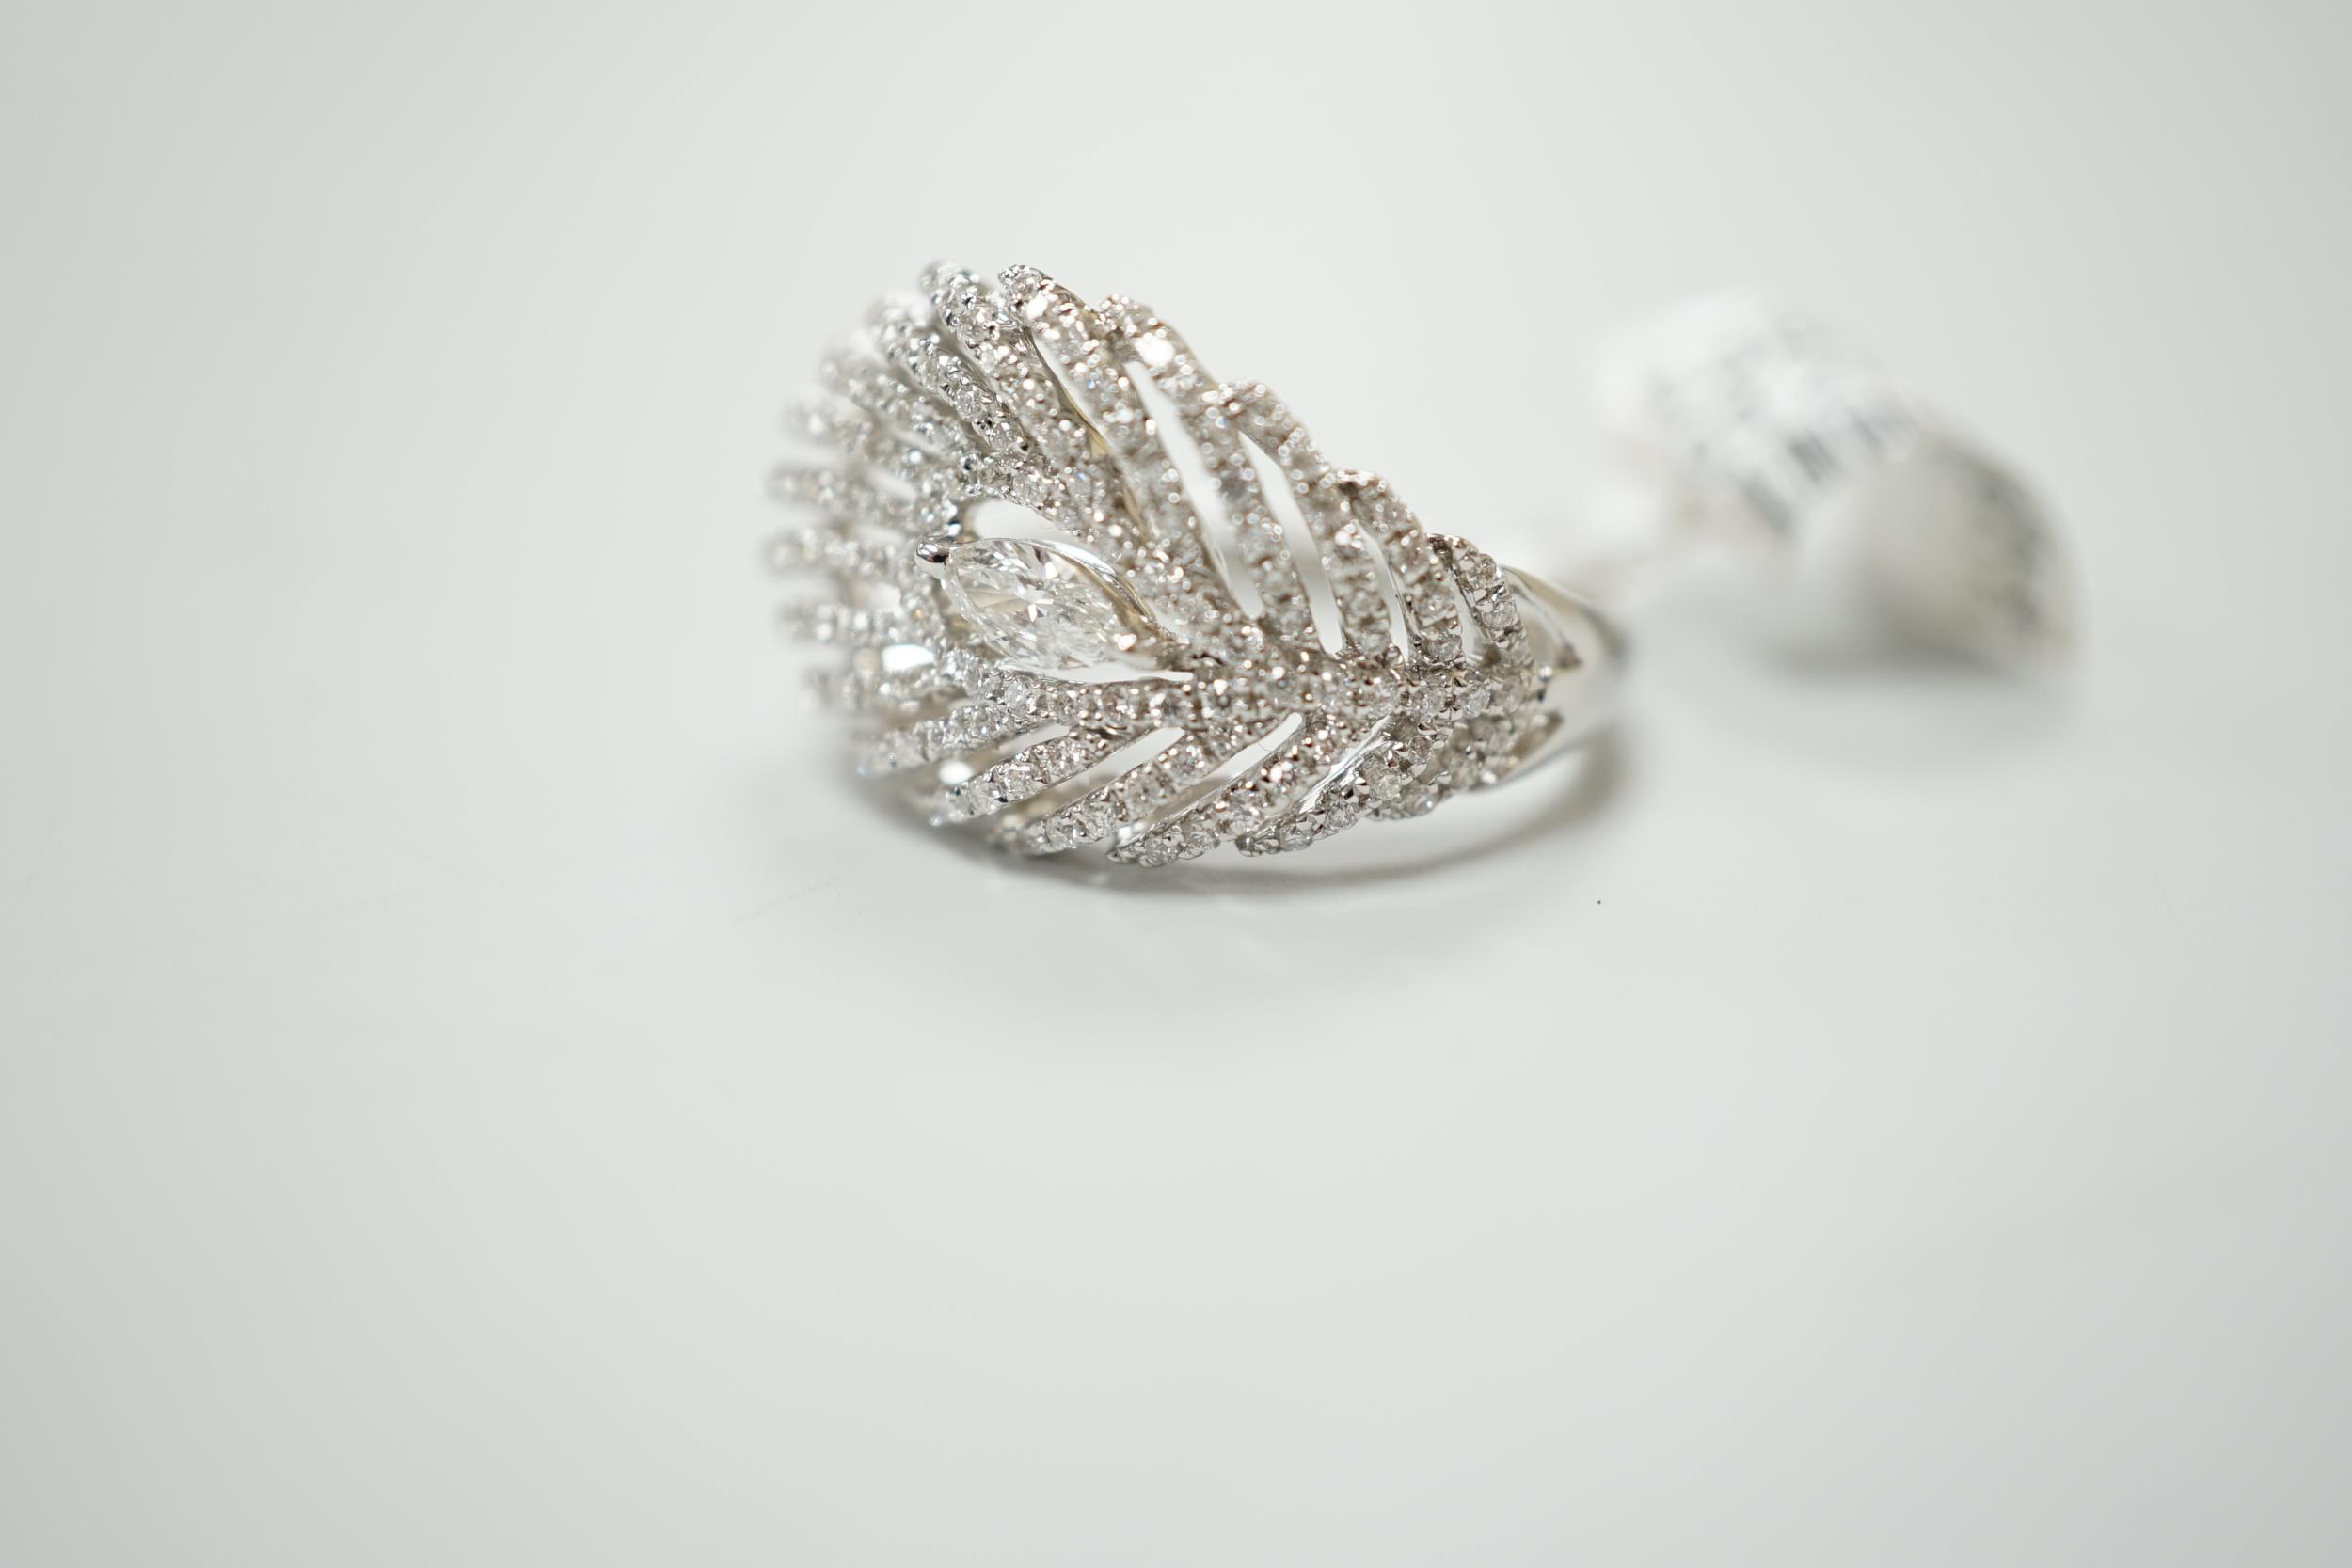 An 18ct white gold and diamond peacock feather design ring, size N - Image 2 of 3